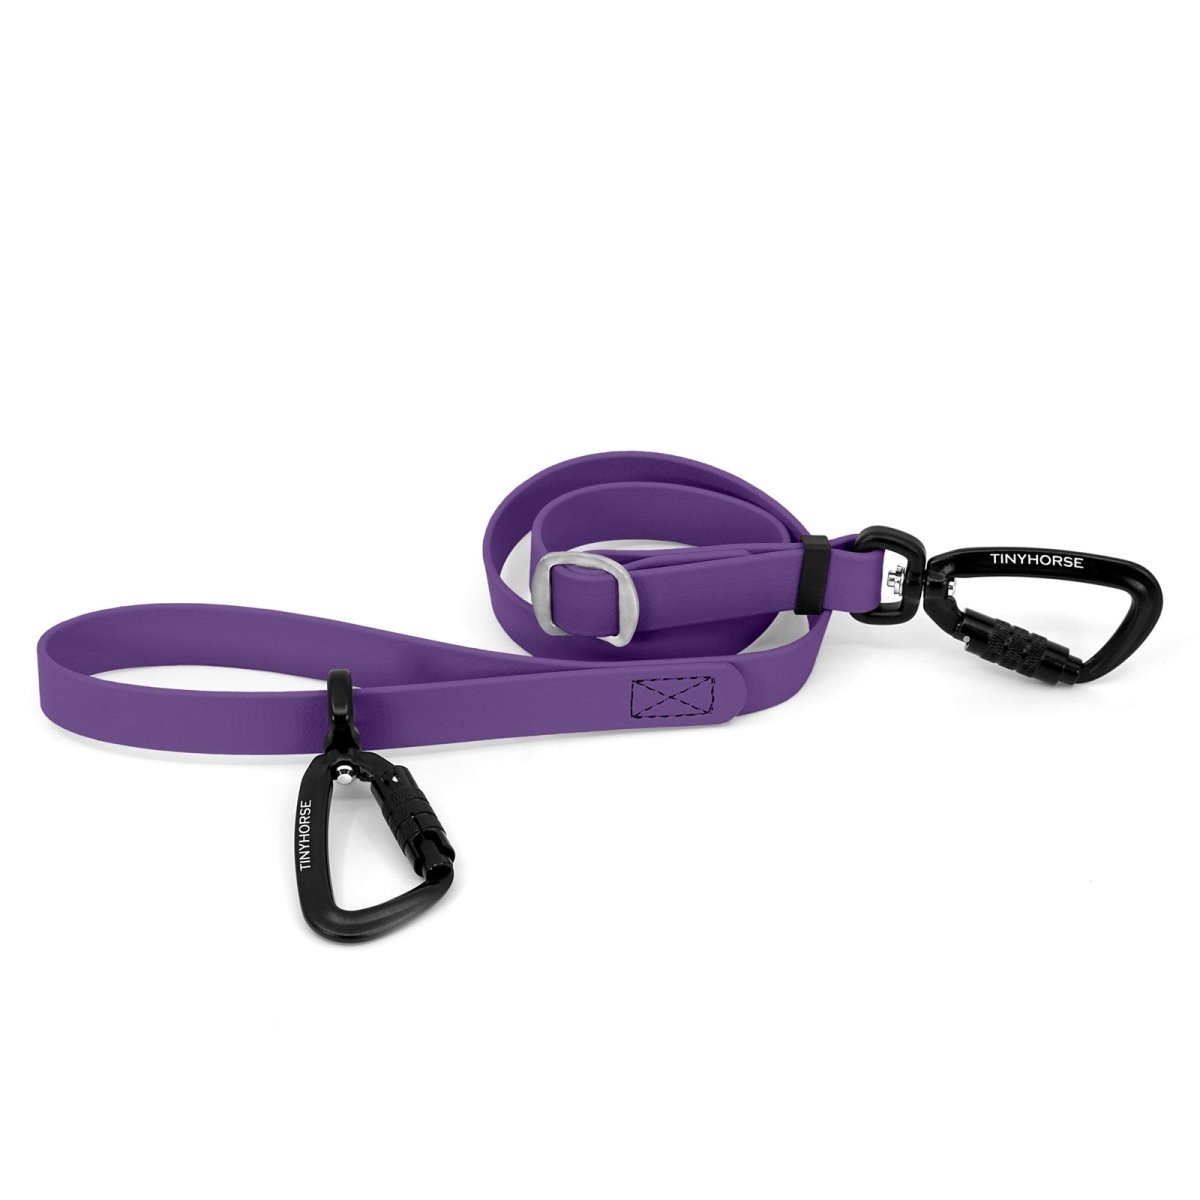 An adjustable amethyst purple-coloured Lead-All Pro made of BioThane with 2 auto-locking carabiners